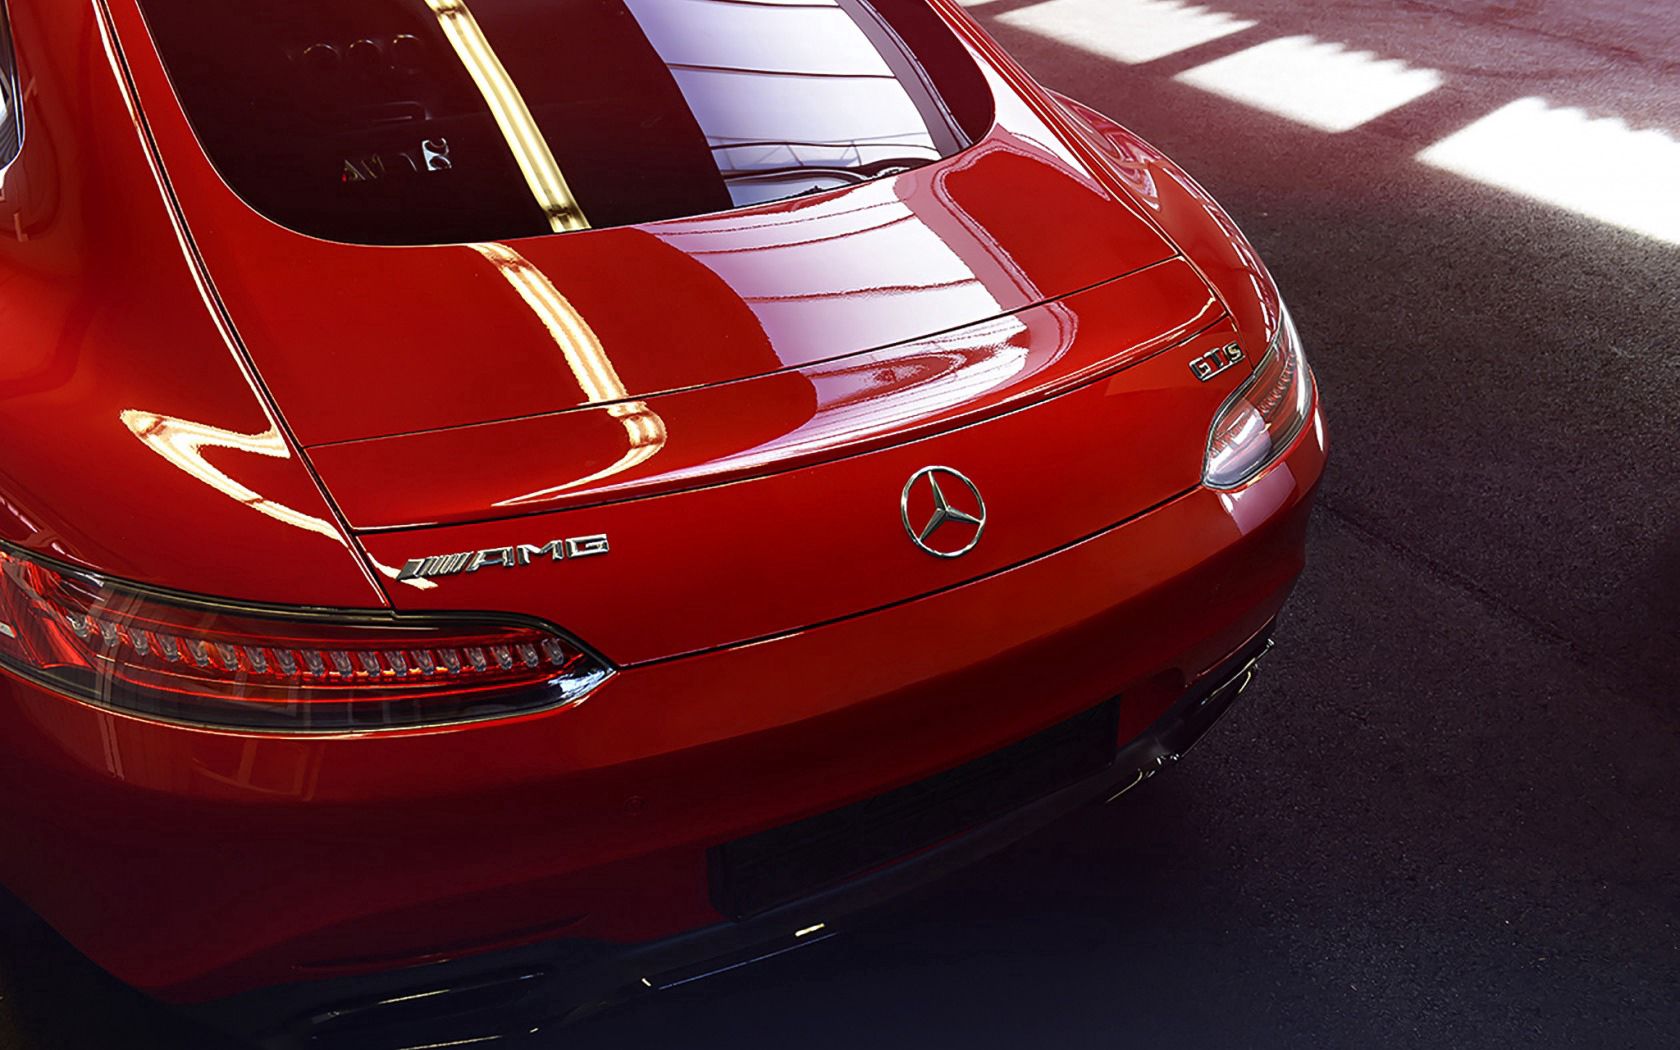 amg, cars, red, back view, rear view, mercedes-benz iphone wallpaper